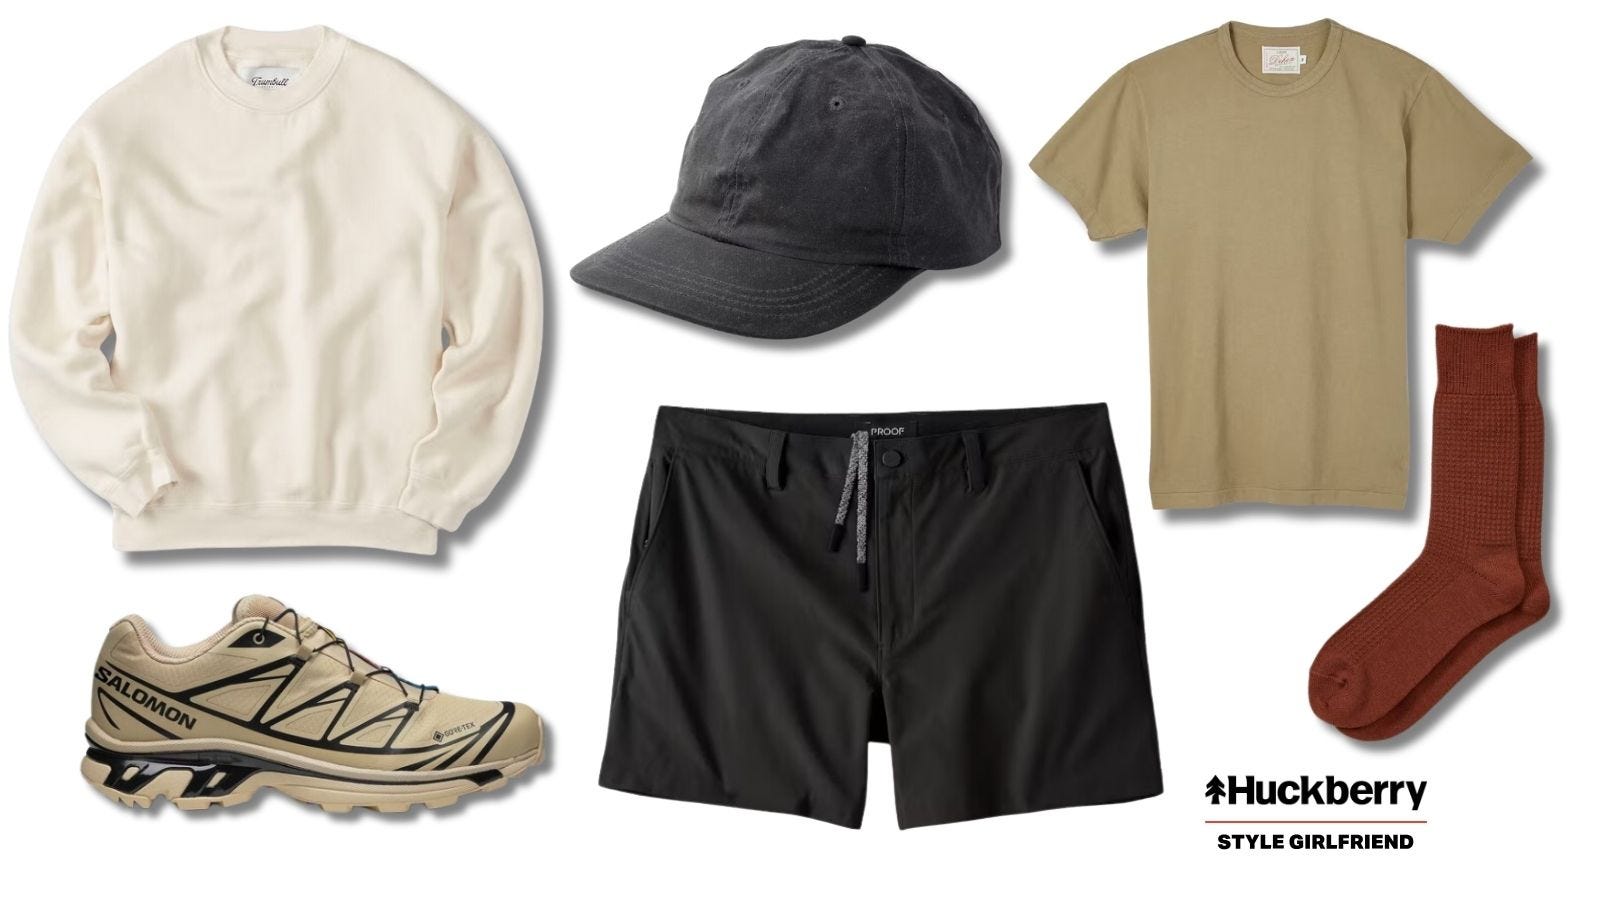 men's shorts outfit featuring a tan t-shirt, cream-colored crewneck sweatshirt, dark baseball cap, lace-up shoes and copper-colored socks